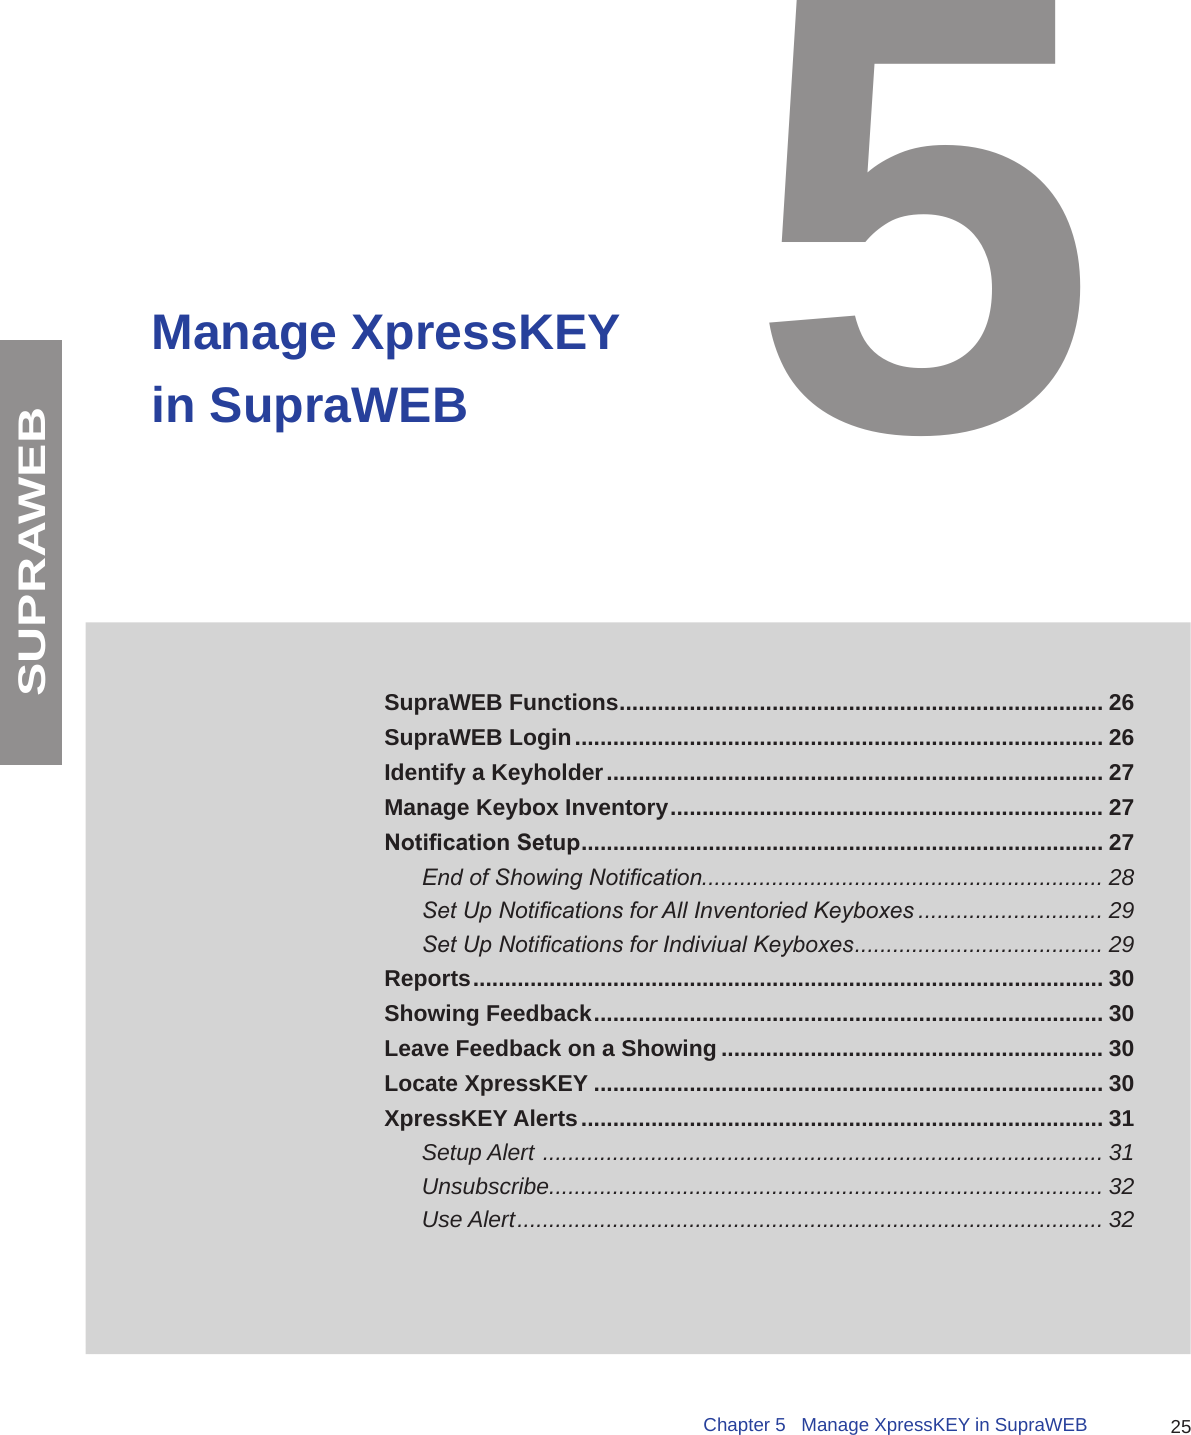 25Chapter 5   Manage XpressKEY in SupraWEBSUPRAWEBManage XpressKEY in SupraWEBSupraWEB Functions ............................................................................ 26SupraWEB Login ................................................................................... 26Identify a Keyholder .............................................................................. 27Manage Keybox Inventory .................................................................... 27Notication Setup .................................................................................. 27End of Showing Notication............................................................... 28Set Up Notications for All Inventoried Keyboxes ............................. 29Set Up Notications for Indiviual Keyboxes ....................................... 29Reports ................................................................................................... 30Showing Feedback ................................................................................ 30Leave Feedback on a Showing ............................................................ 30Locate XpressKEY ................................................................................ 30XpressKEY Alerts .................................................................................. 31Setup Alert  ........................................................................................ 31Unsubscribe....................................................................................... 32 Use Alert ............................................................................................ 325